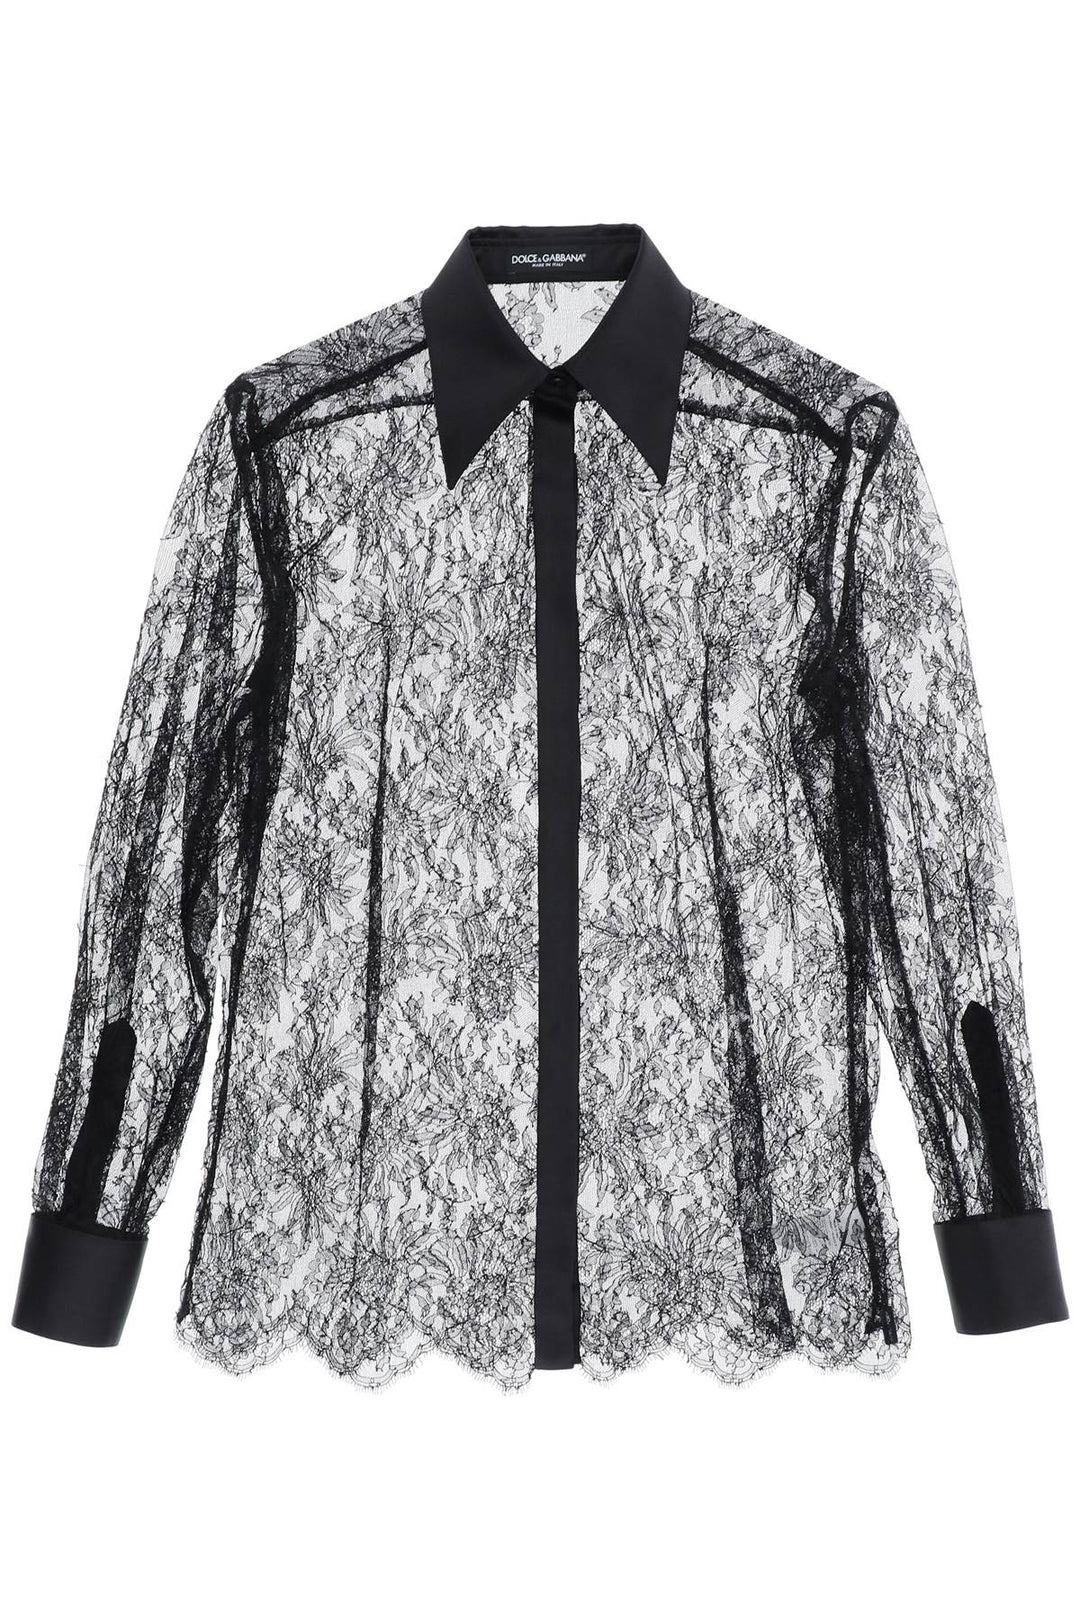 Camicia In Pizzo Chantilly - Dolce & Gabbana - Donna